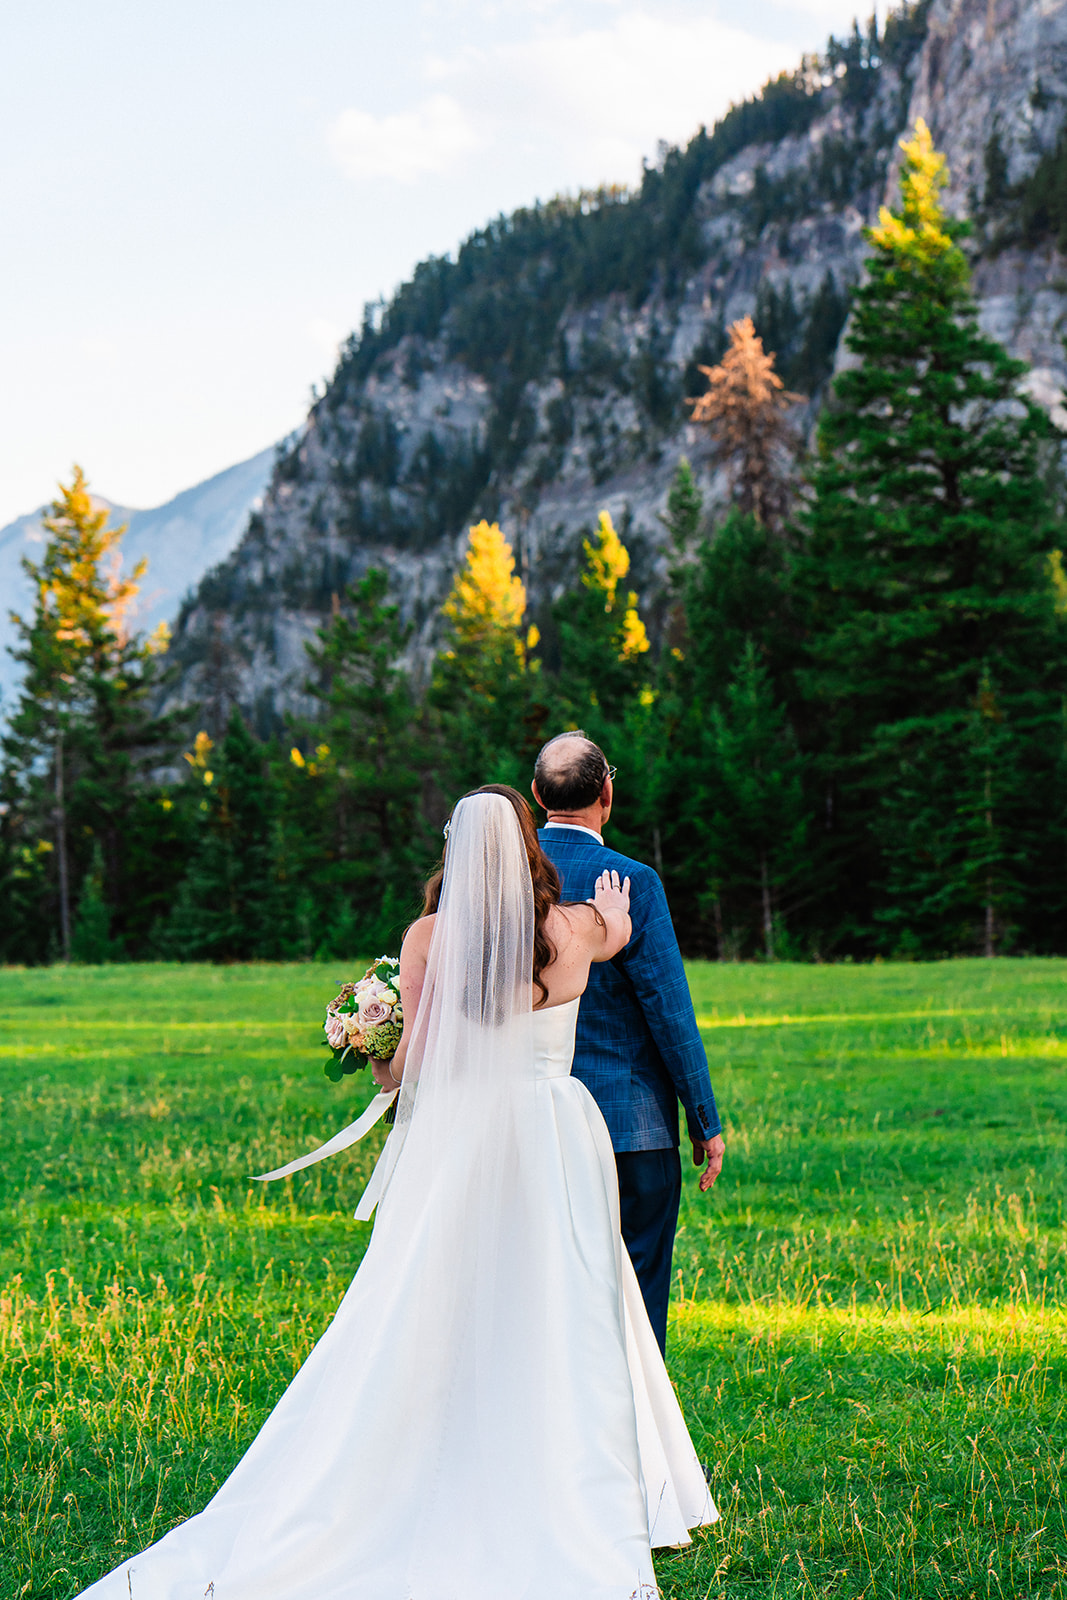 Brides first look with father in Banff